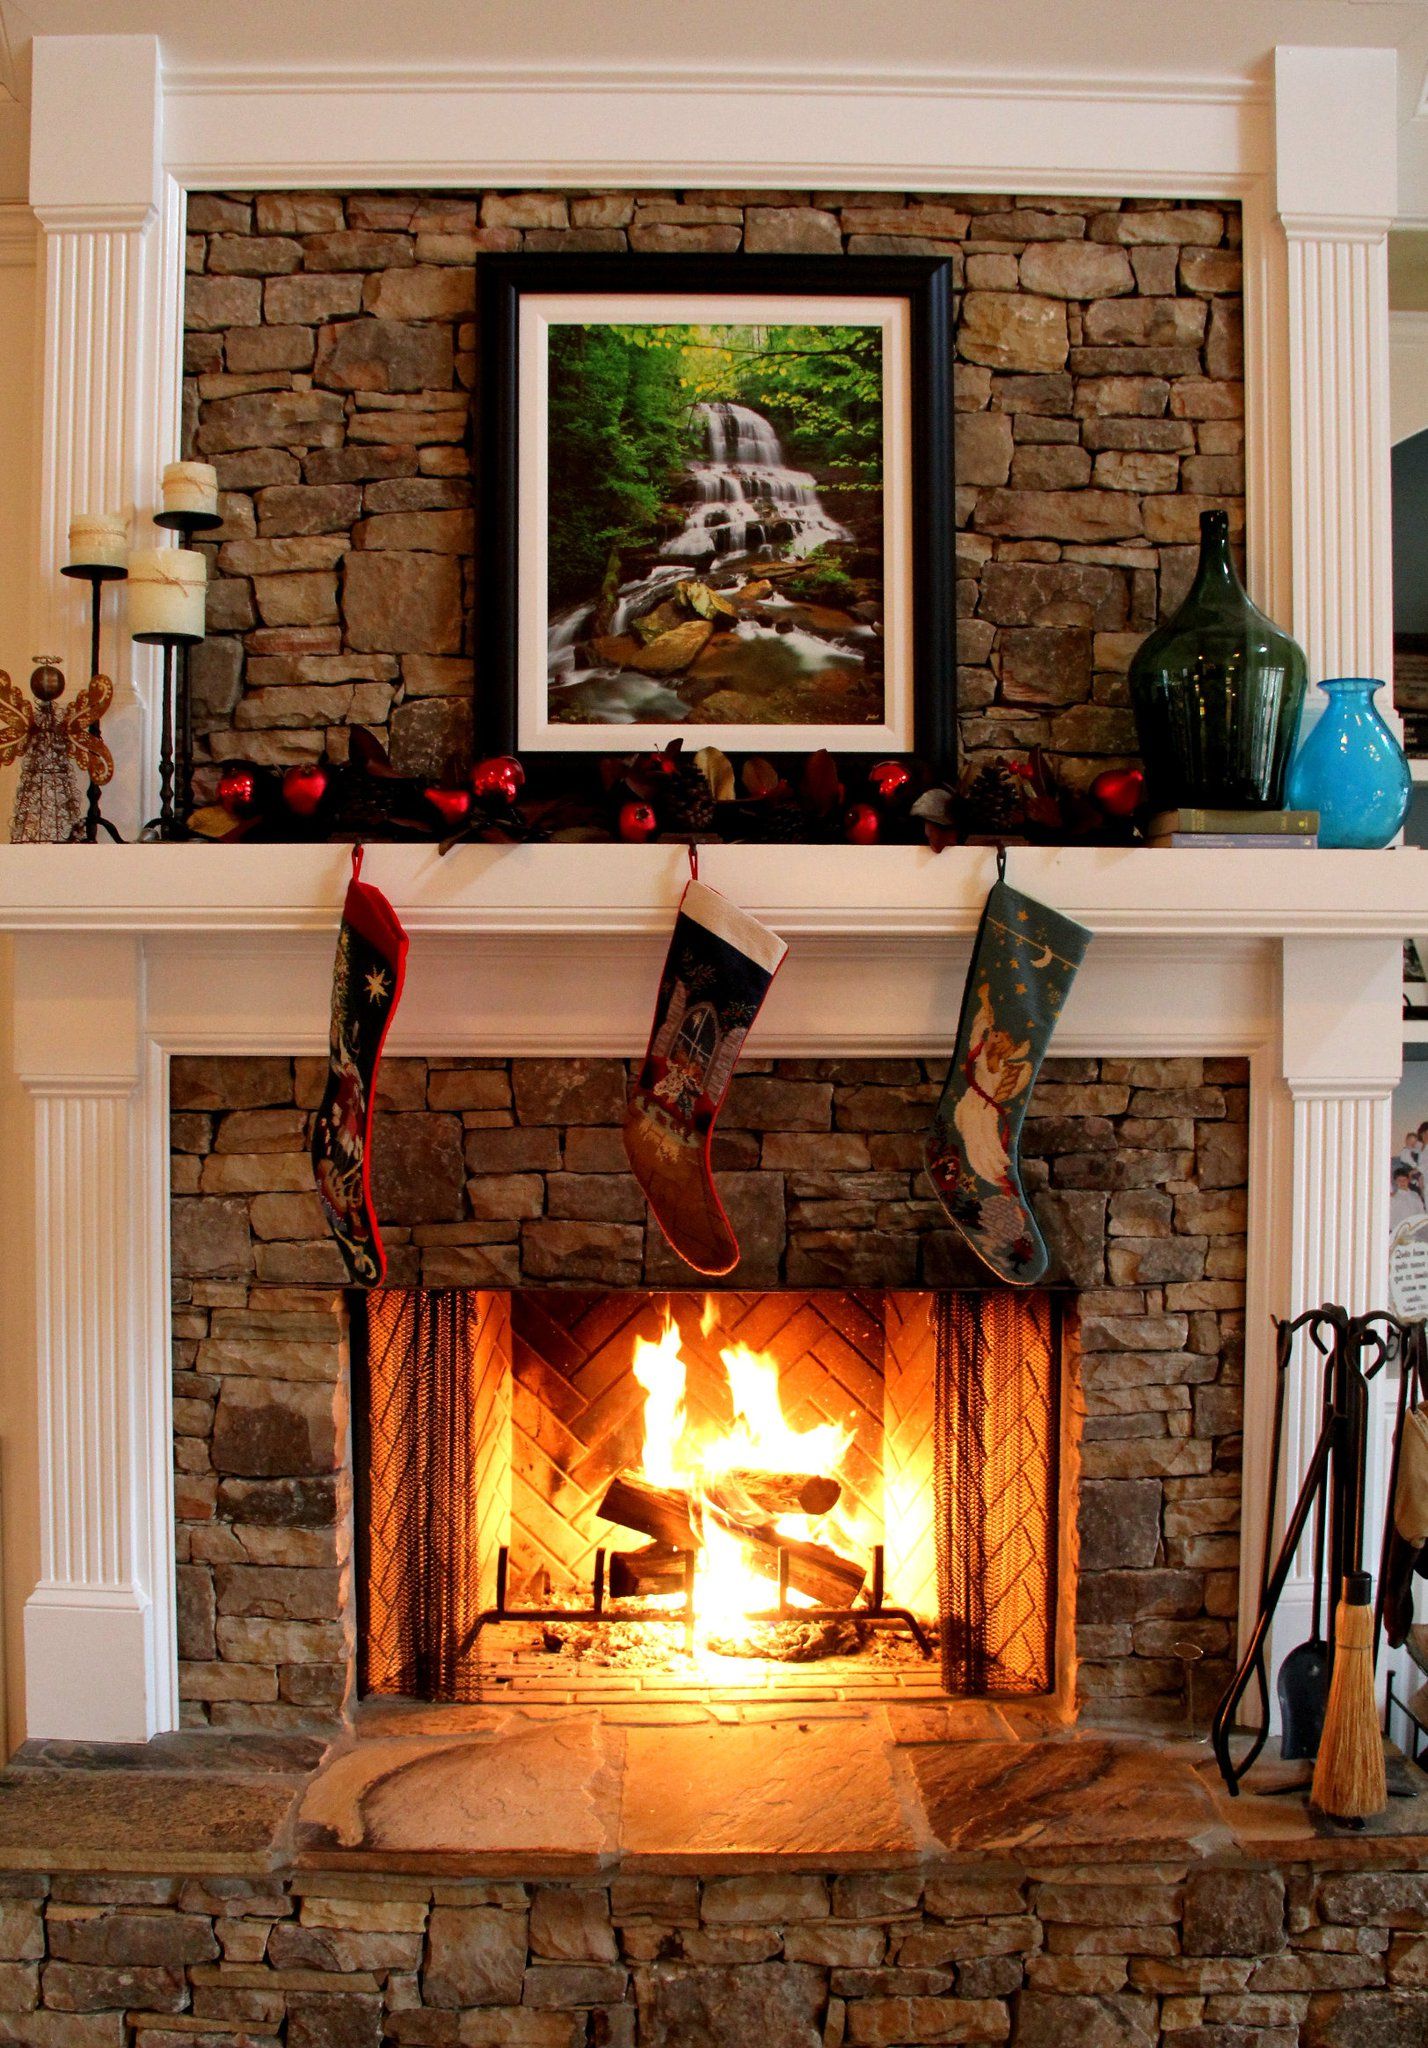 Pro Fireplace Lovely Love the Wood Mixed with the Fireplace Adn the Slate Hearth